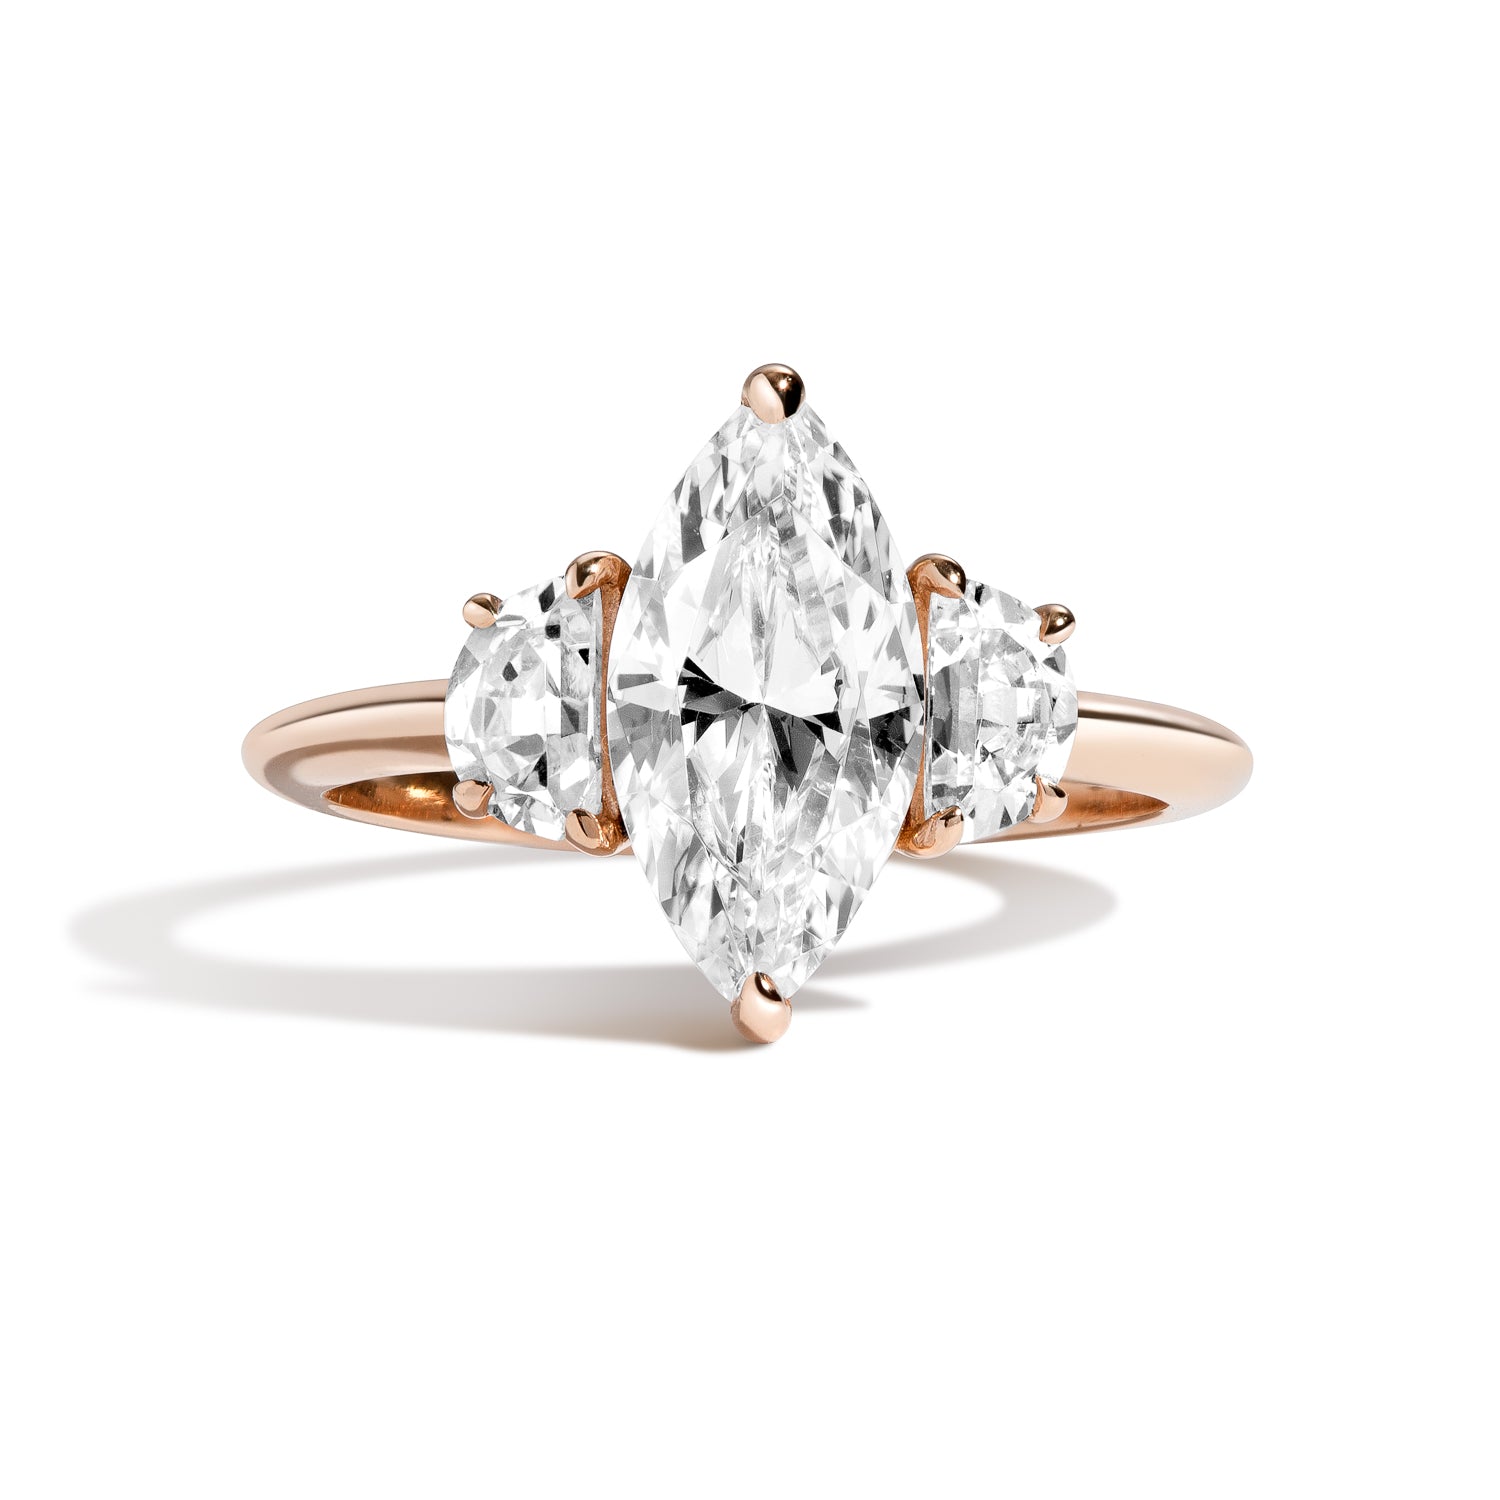 Shahla Karimi Jewelry 3-Stone Marquise + Half-Moon Ring in 14K Rose Gold